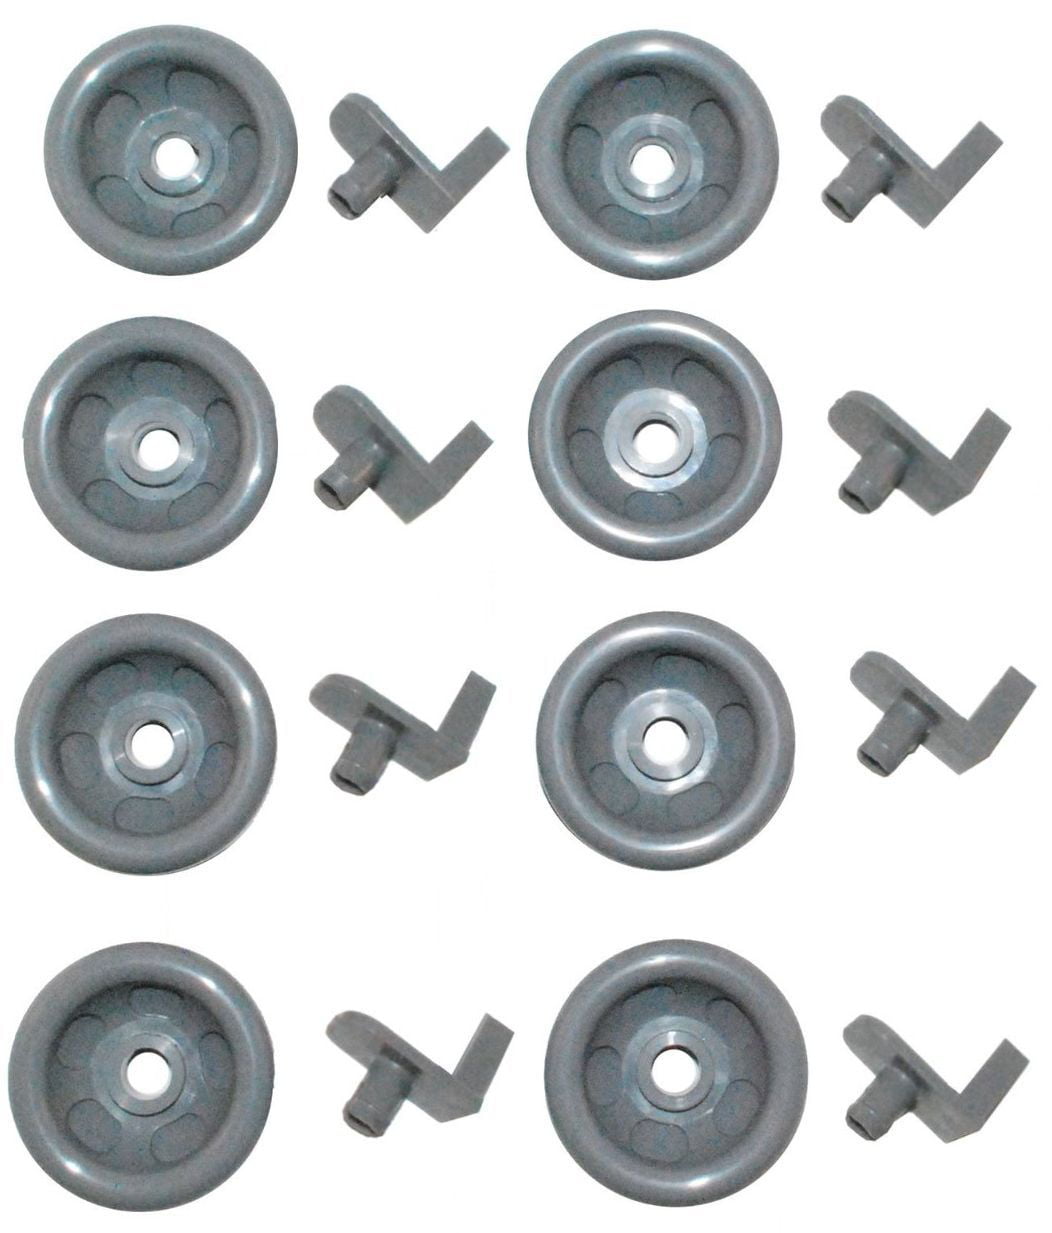 WD12X10136 WD12X10277 Dishwasher Wheels for GE Profile Lower Rack Kit 8PC Studs 